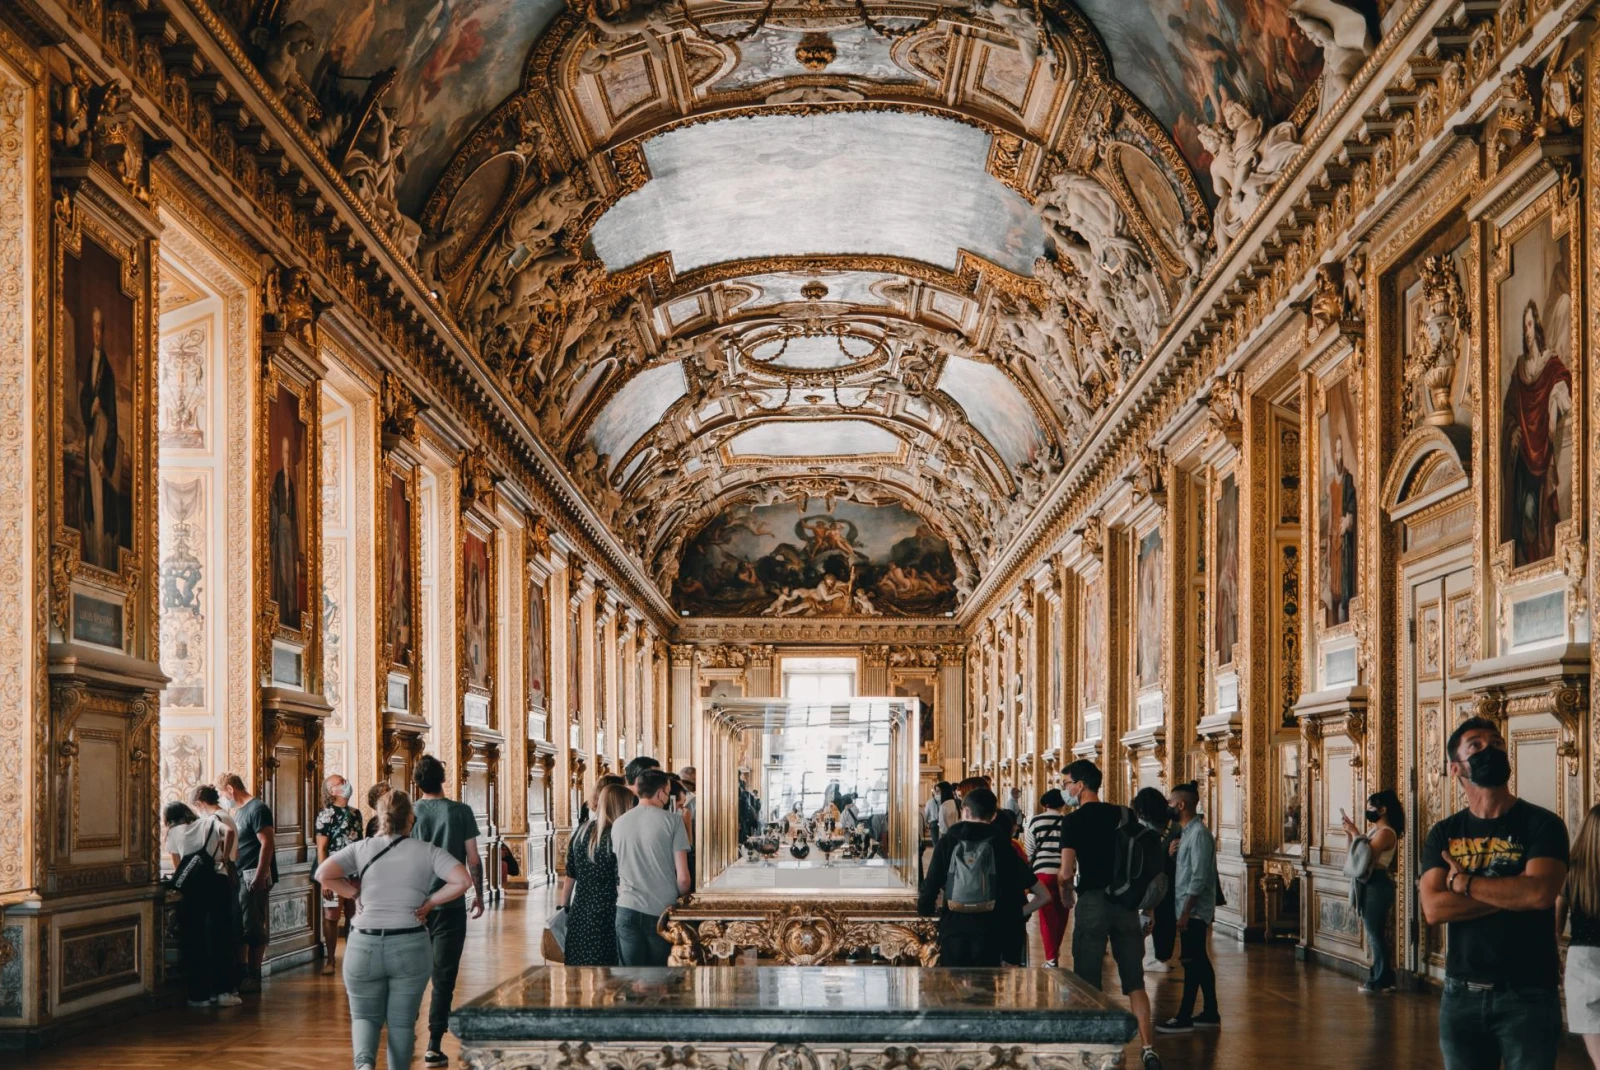 Inside a decorated hall of the Louvre displaying Renaissance paintings from floor to ceiling.